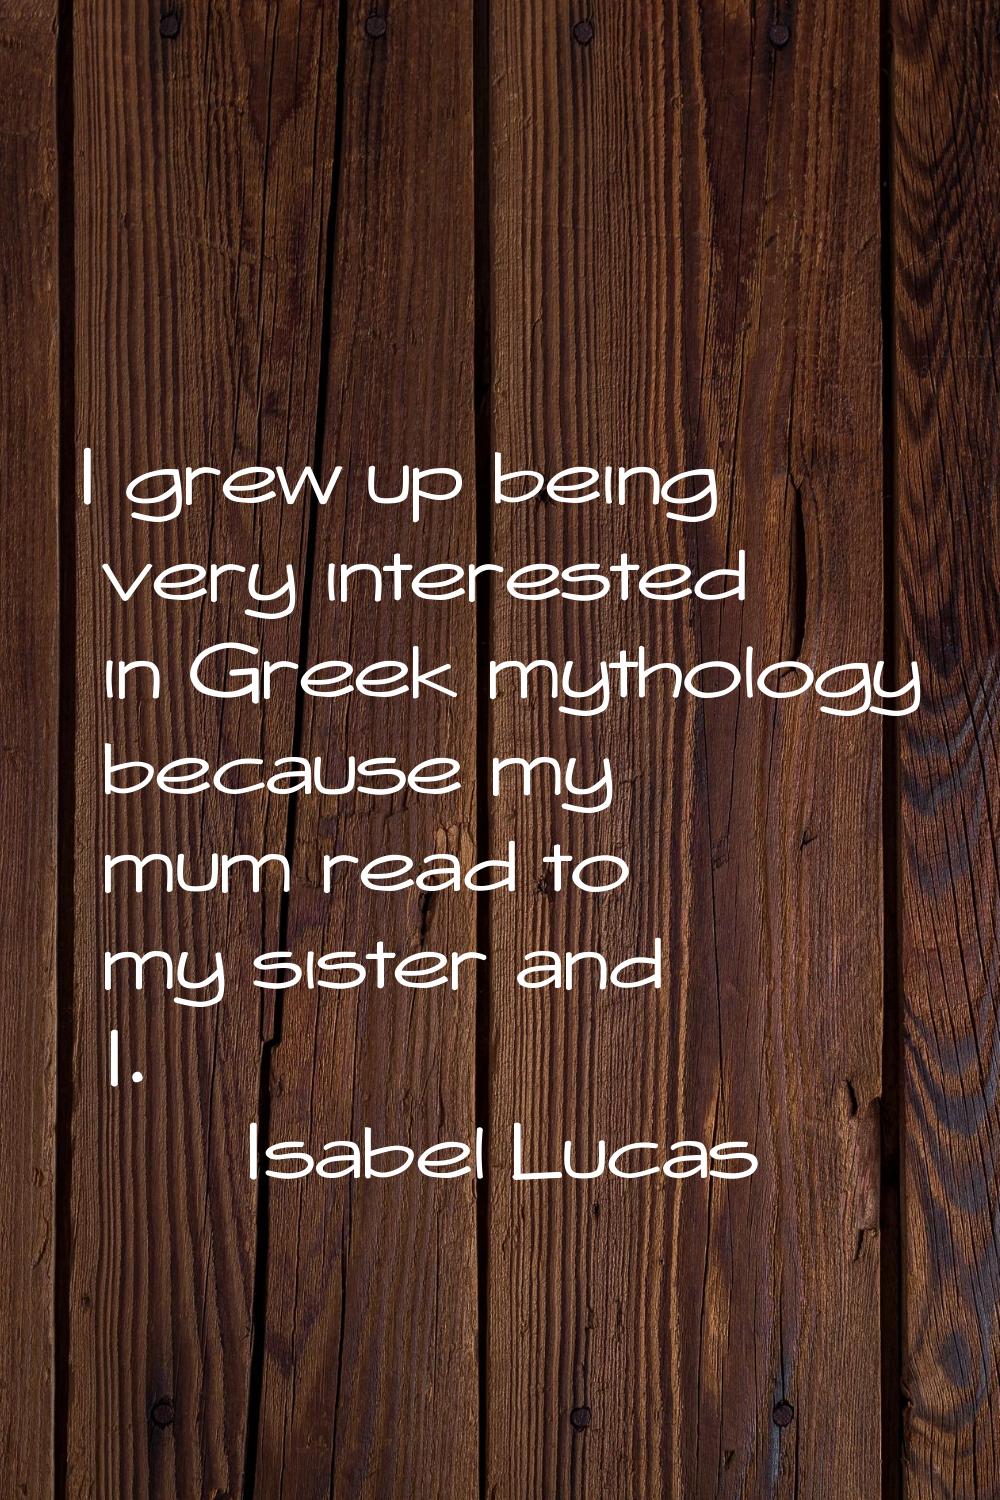 I grew up being very interested in Greek mythology because my mum read to my sister and I.